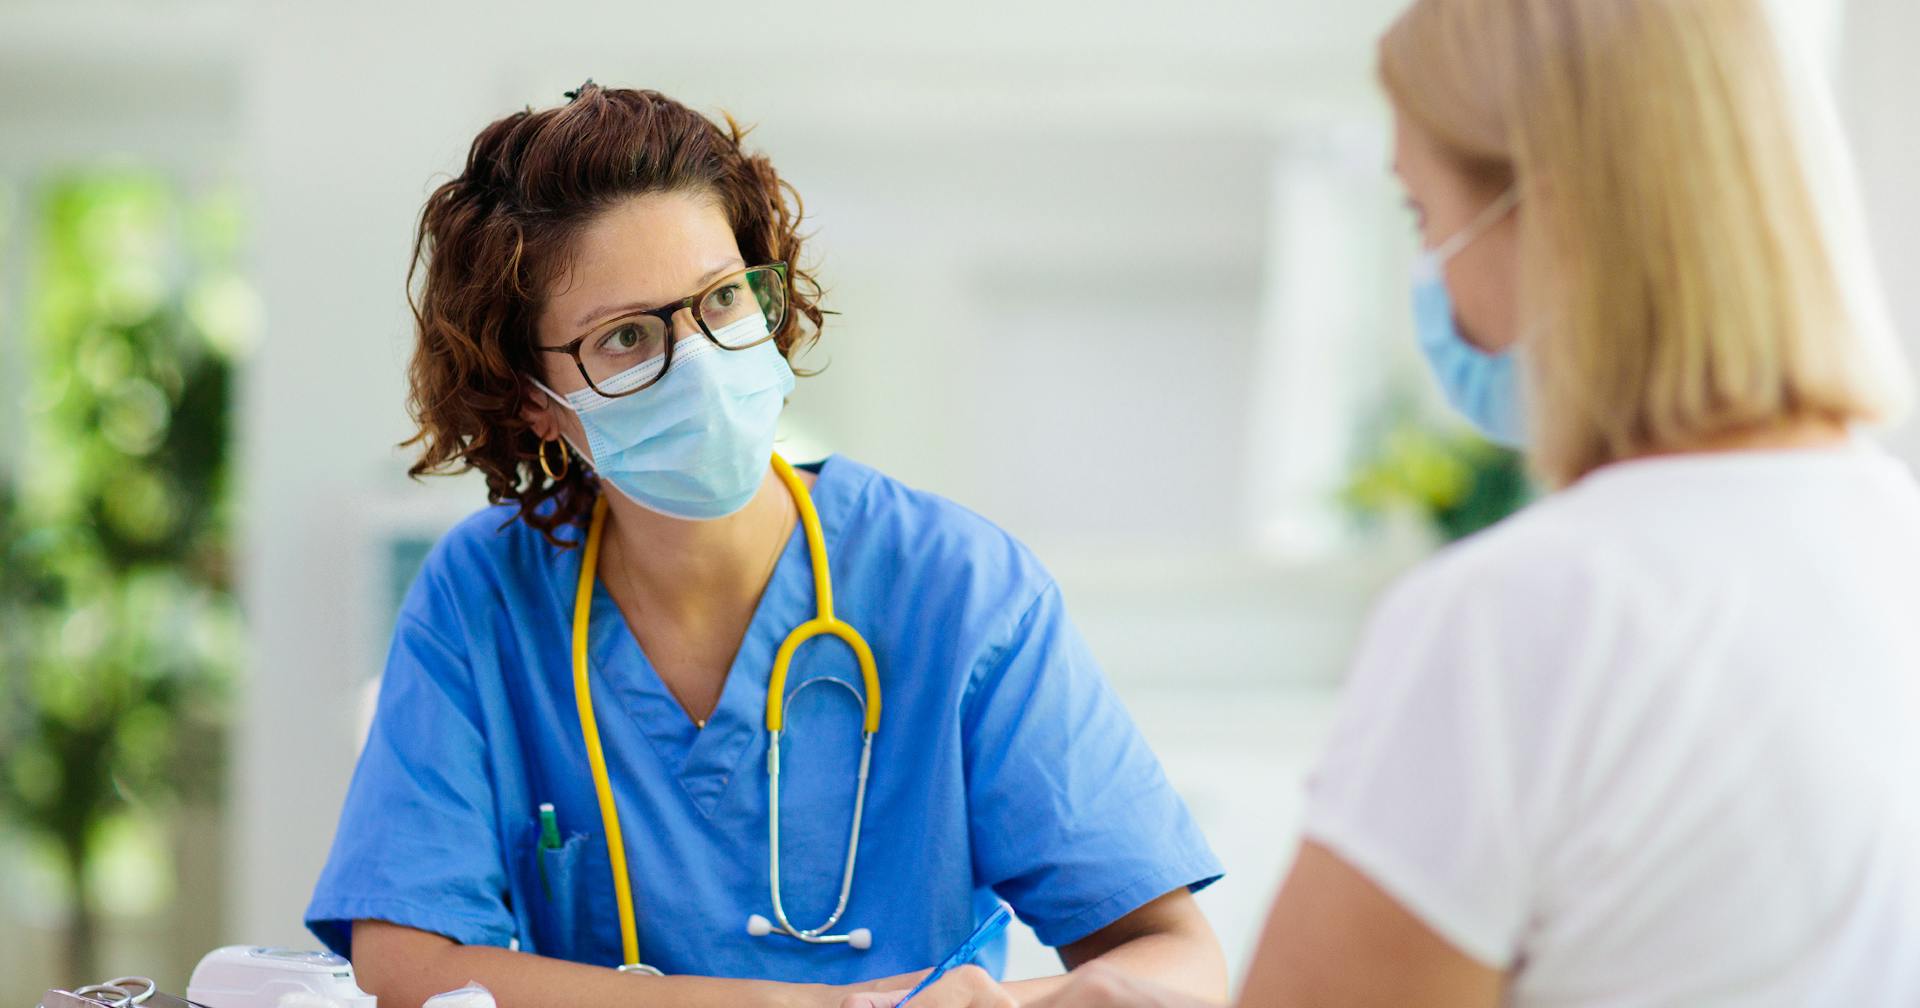 Health care provider takes notes while she talks with a patient (both wearing masks).